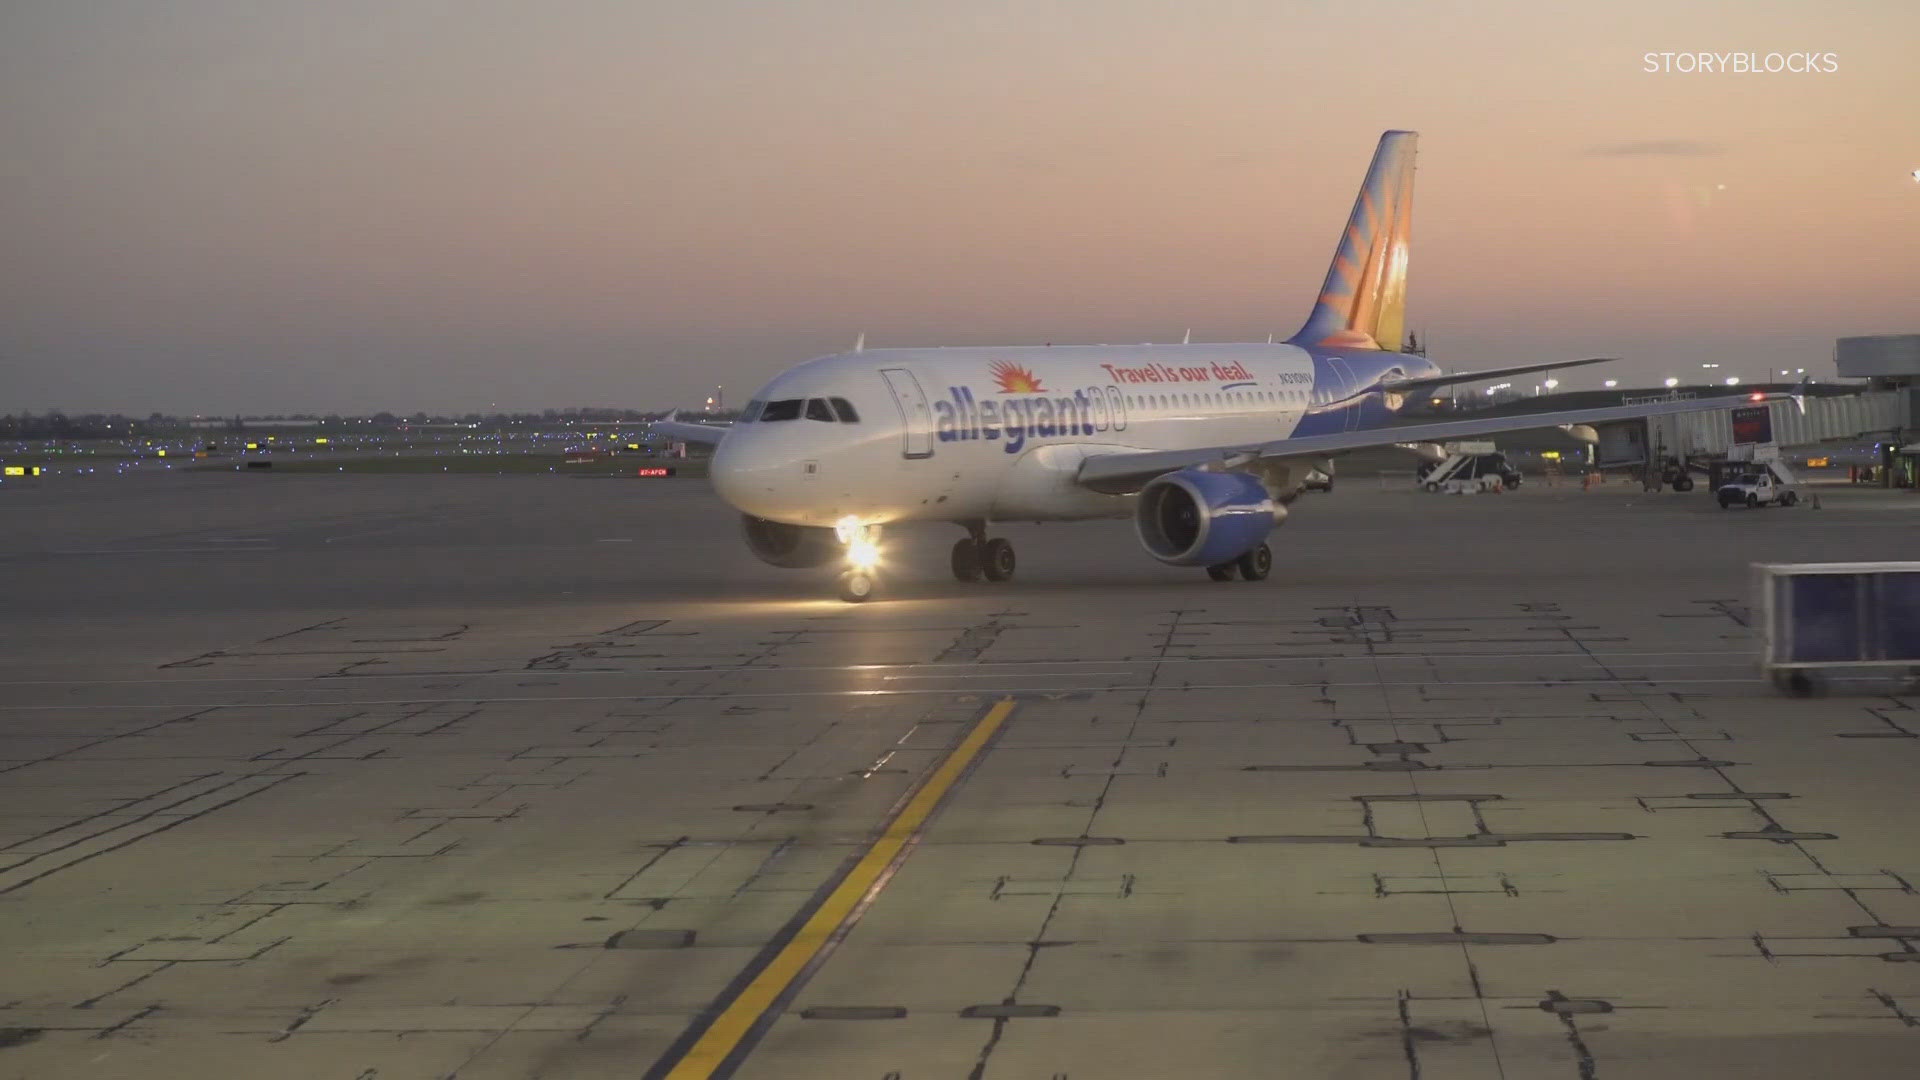 Allegiant announced today it will add a nonstop, roundtrip flight to Knoxville from The Mid-America airport in Mascoutah. The route starts June 13.